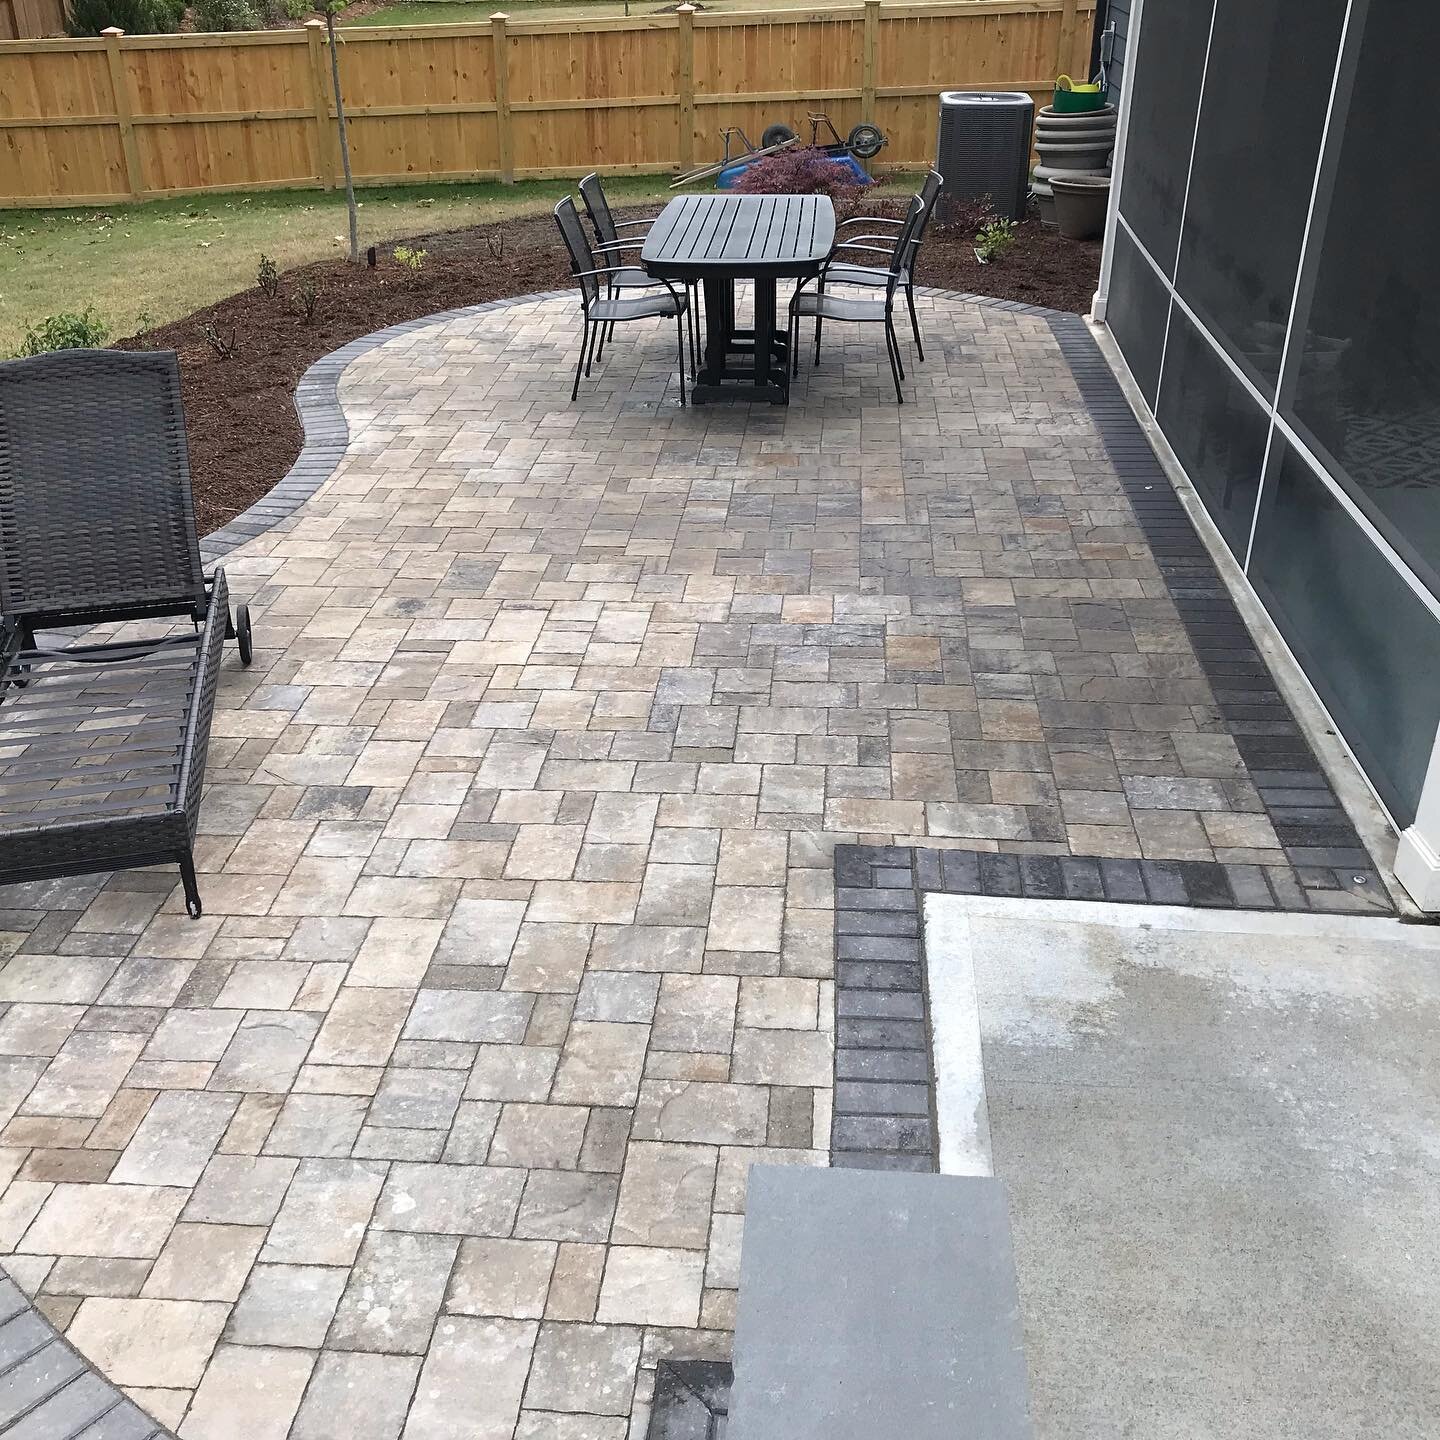 This is the second patio in Canterbury subdivision in Durham, NC we&rsquo;ve installed. We used #belgard Lafitt paver in Hatteras color as the field with Holland Stone in Slate color as the Border, installed #inlite recessed lights in the pavers to g